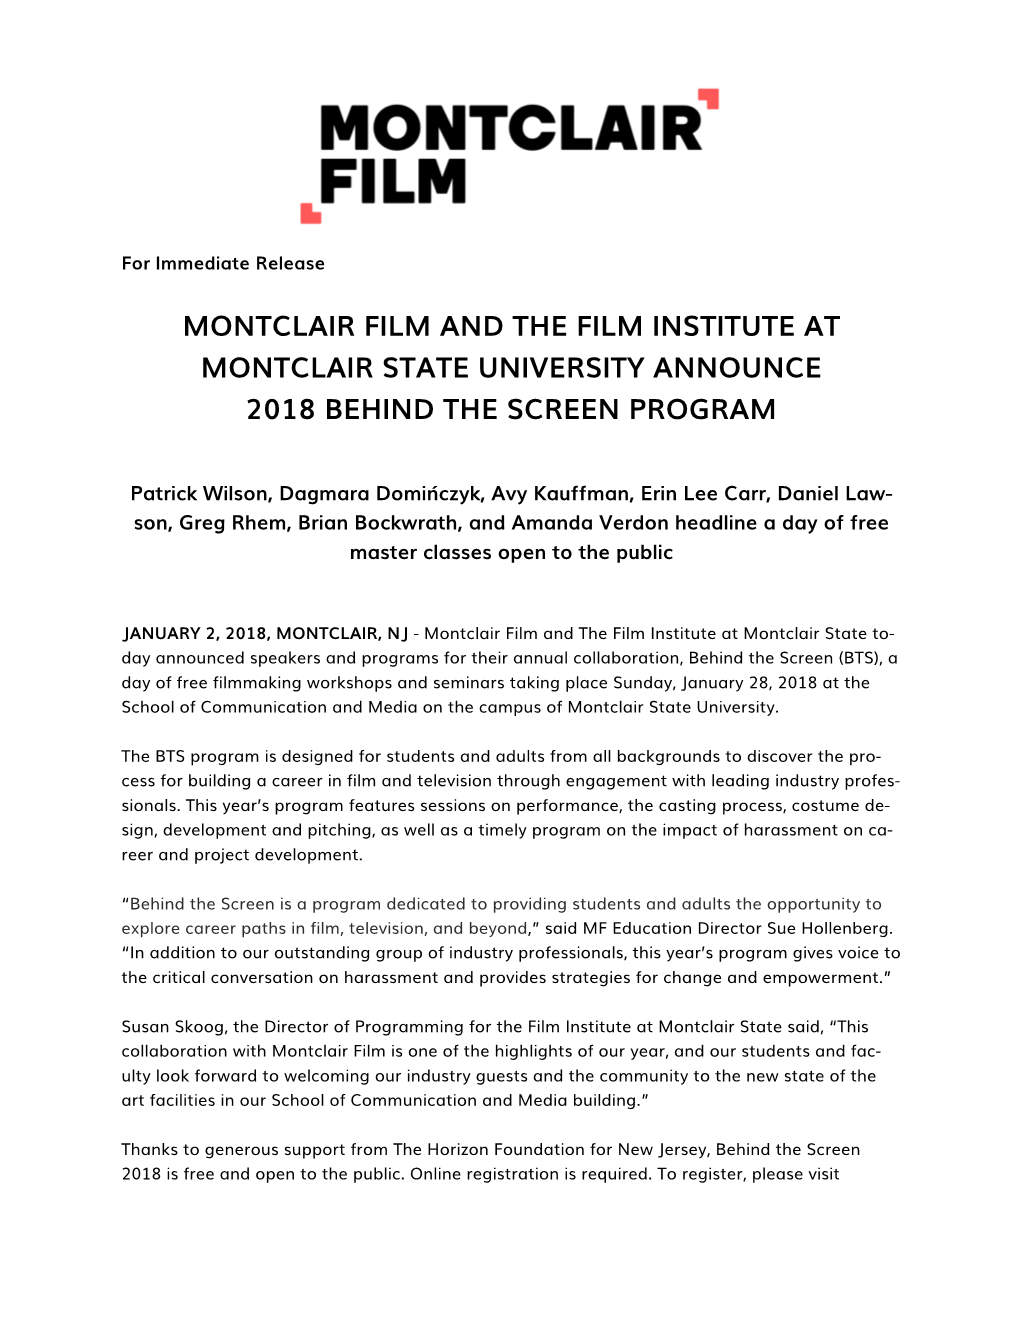 Montclair Film and the Film Institute at Montclair State University Announce 2018 Behind the Screen Program